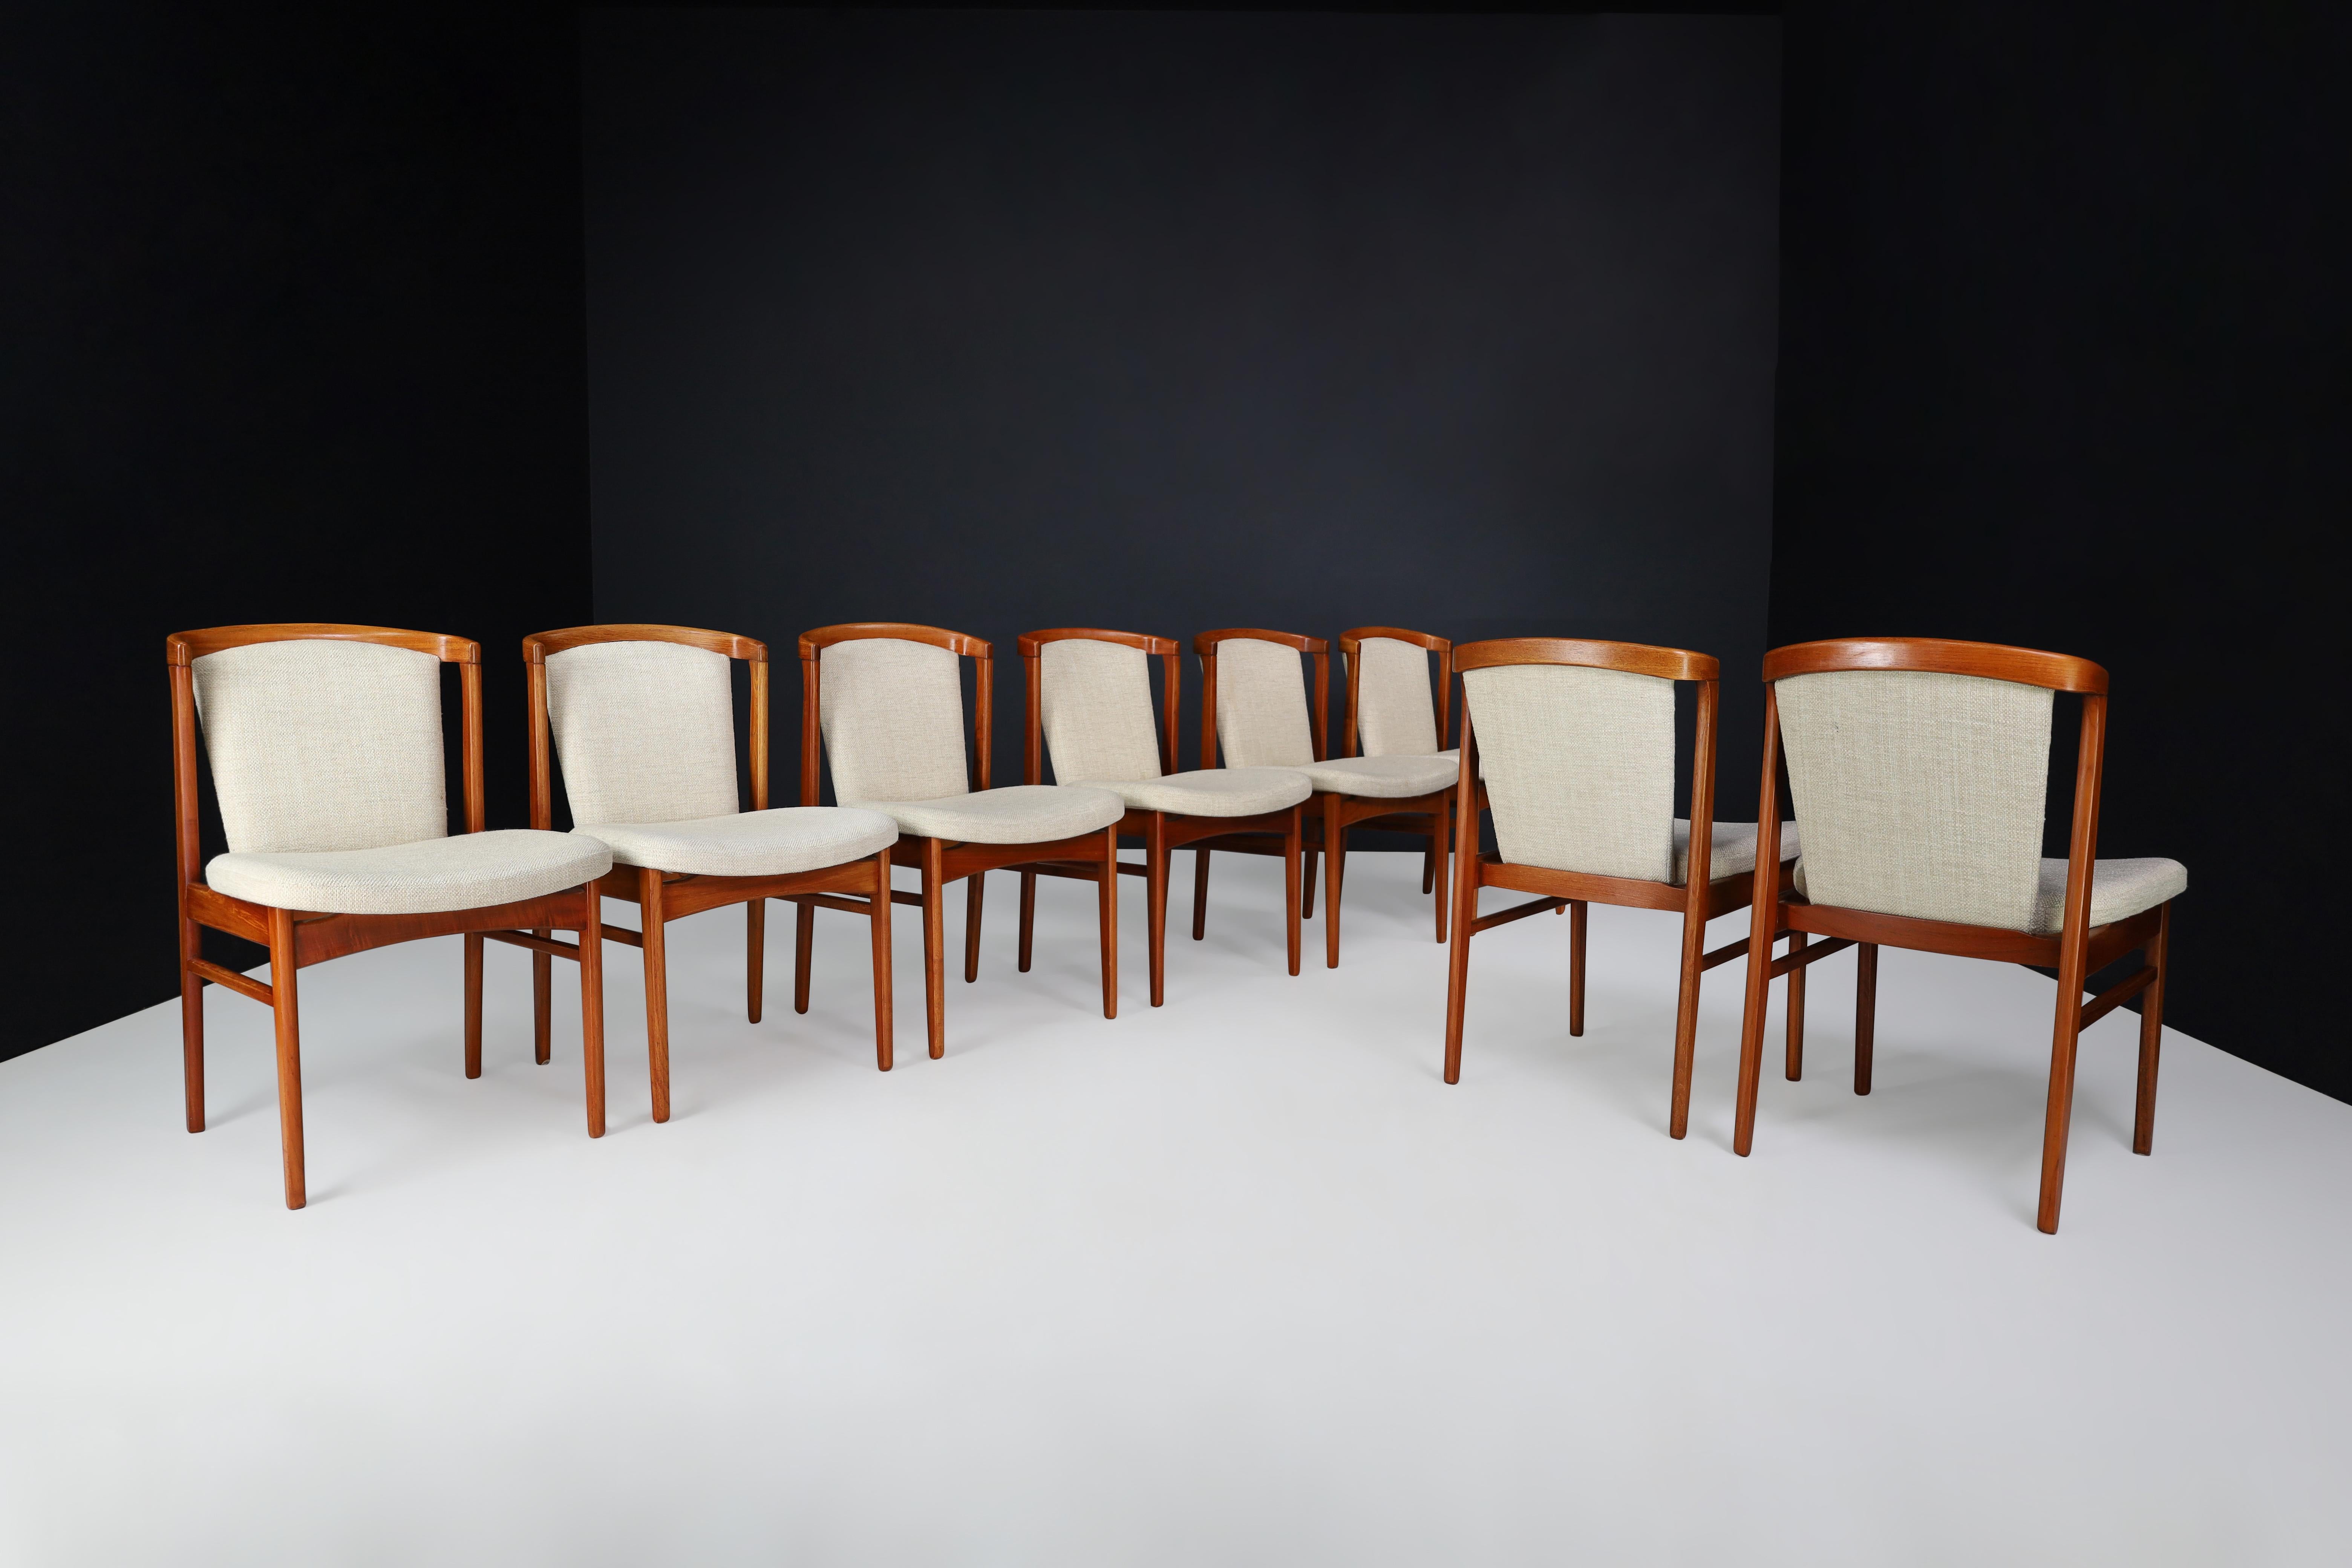 20th Century Erik Buch Dining Chairs for Orum Mobler, Denmark, 1960s For Sale